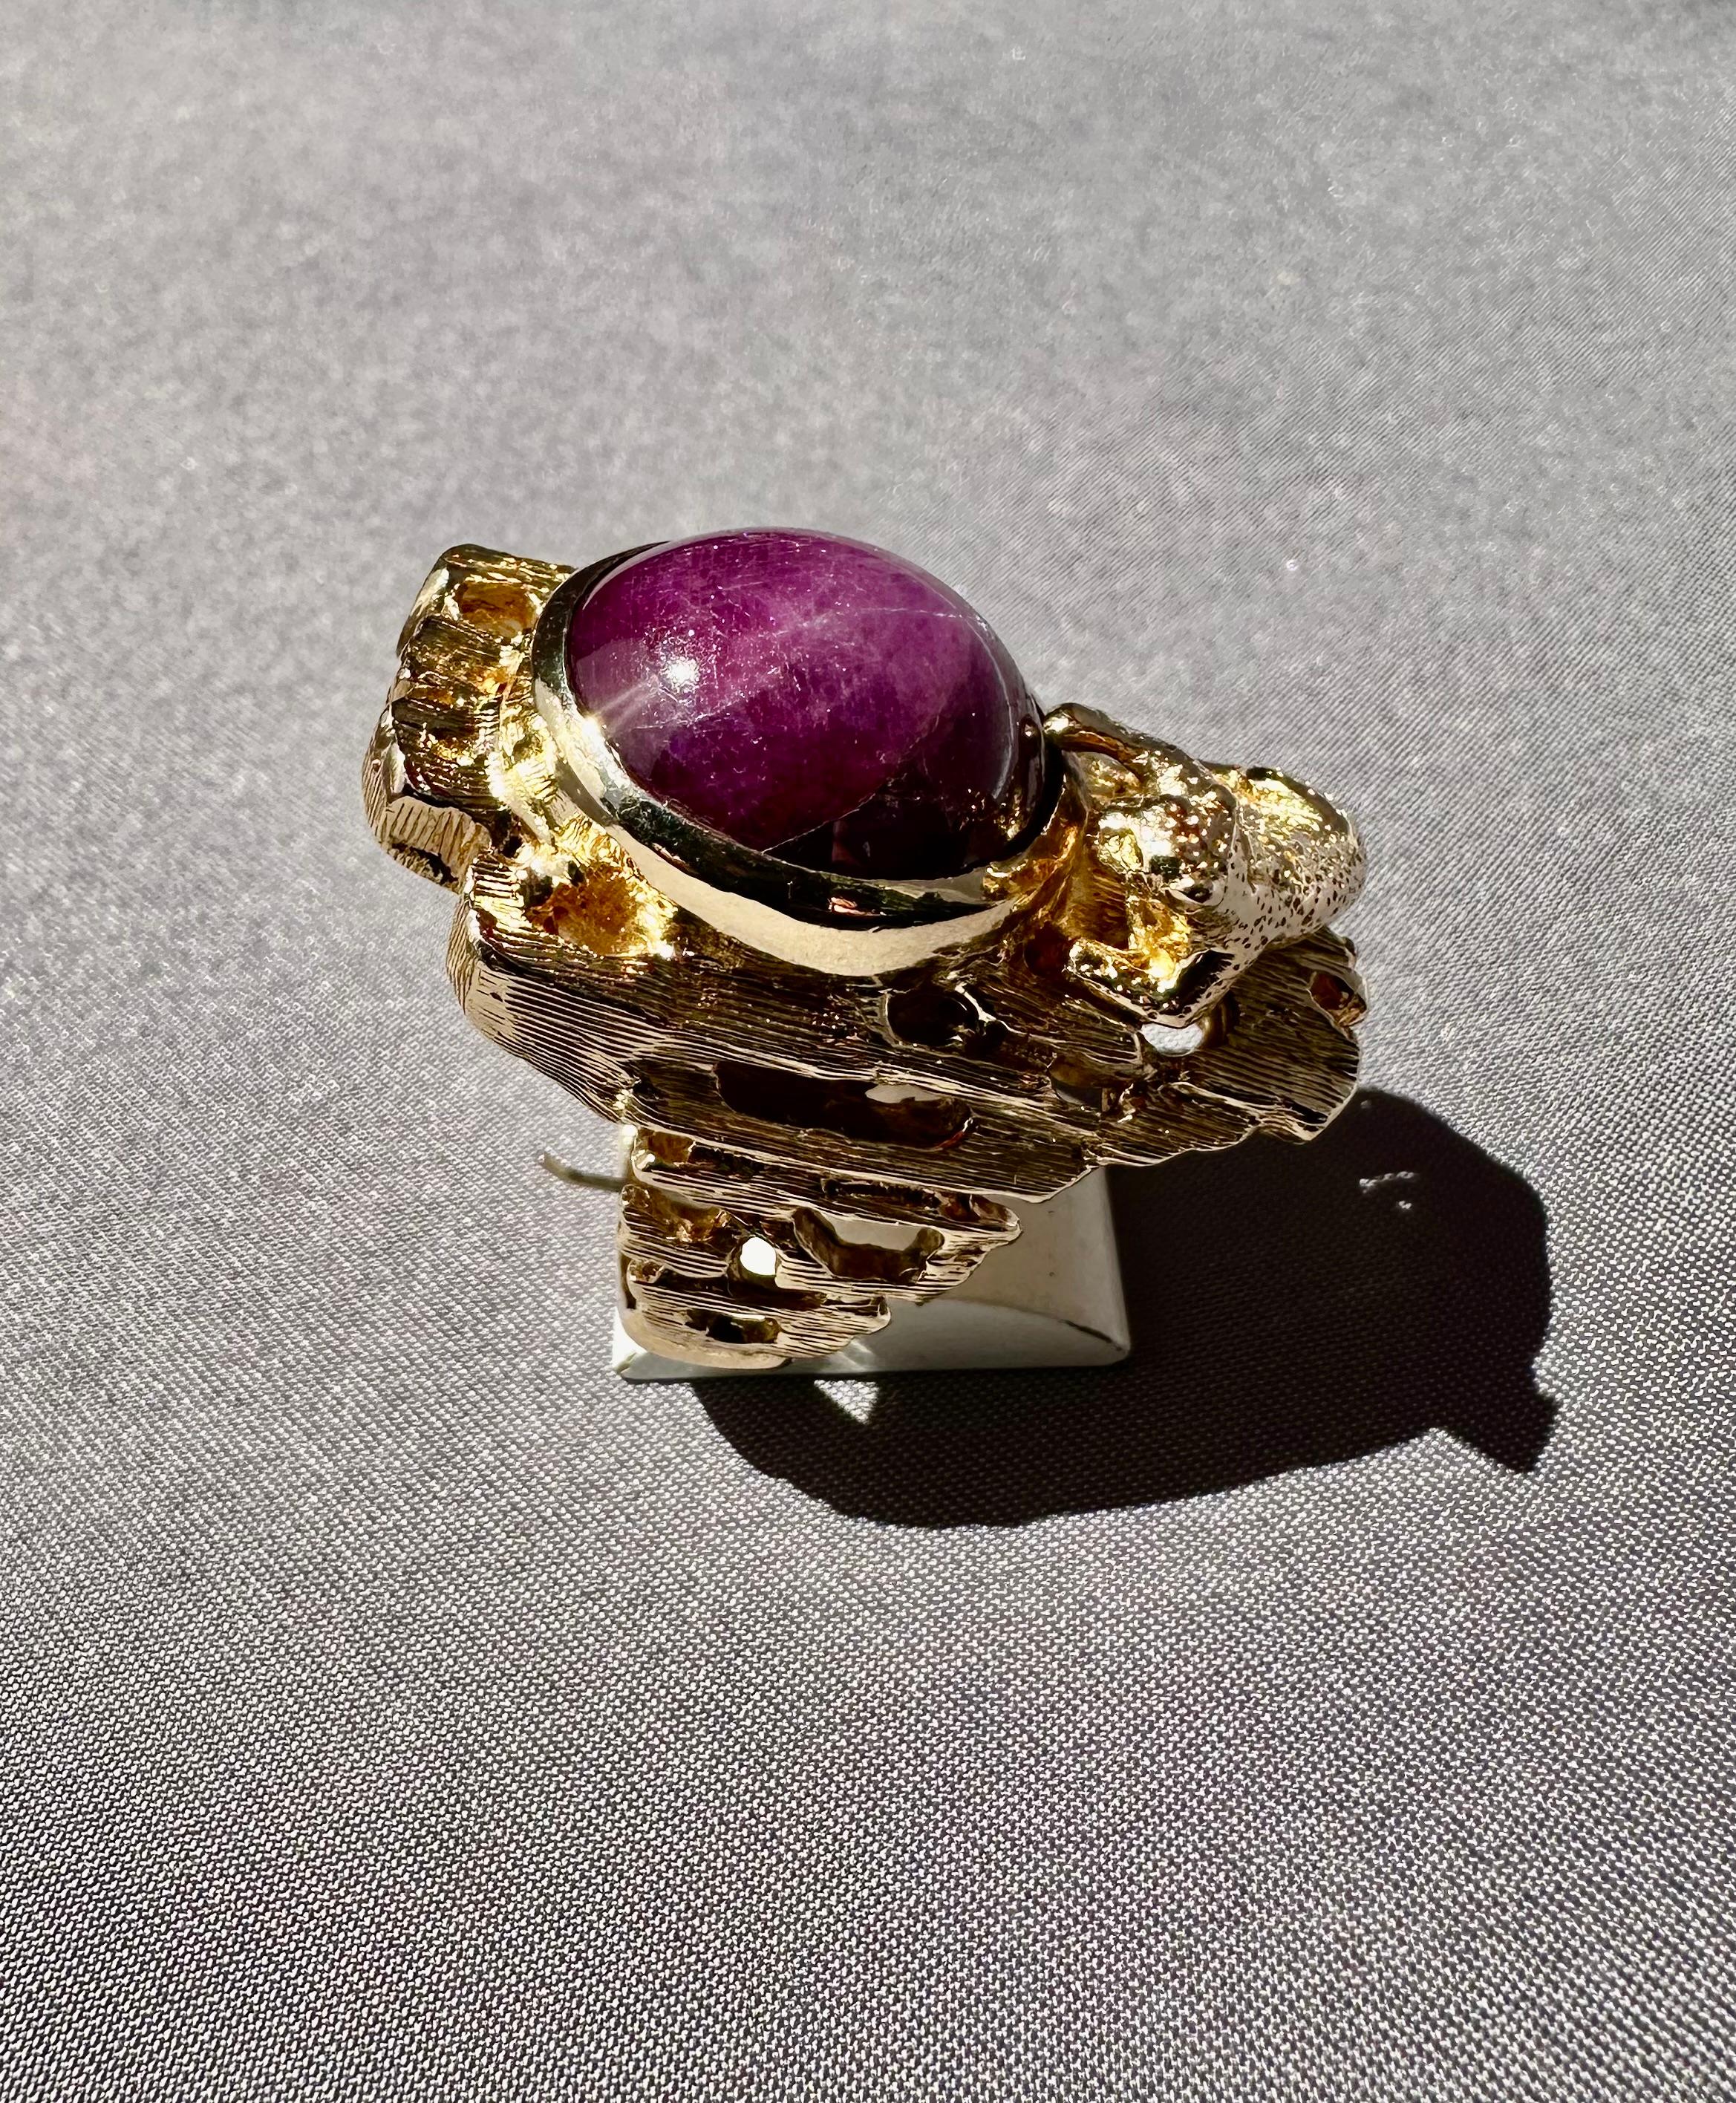 Men's Genuine Natural East Indian Ruby Star 18 Cts. 14K Yellow Gold Leopard Ring

Description / Condition: New. All jewelry has been professionally scrutinized and cleaned prior to being offered for sale. Leopard figure with gold bark